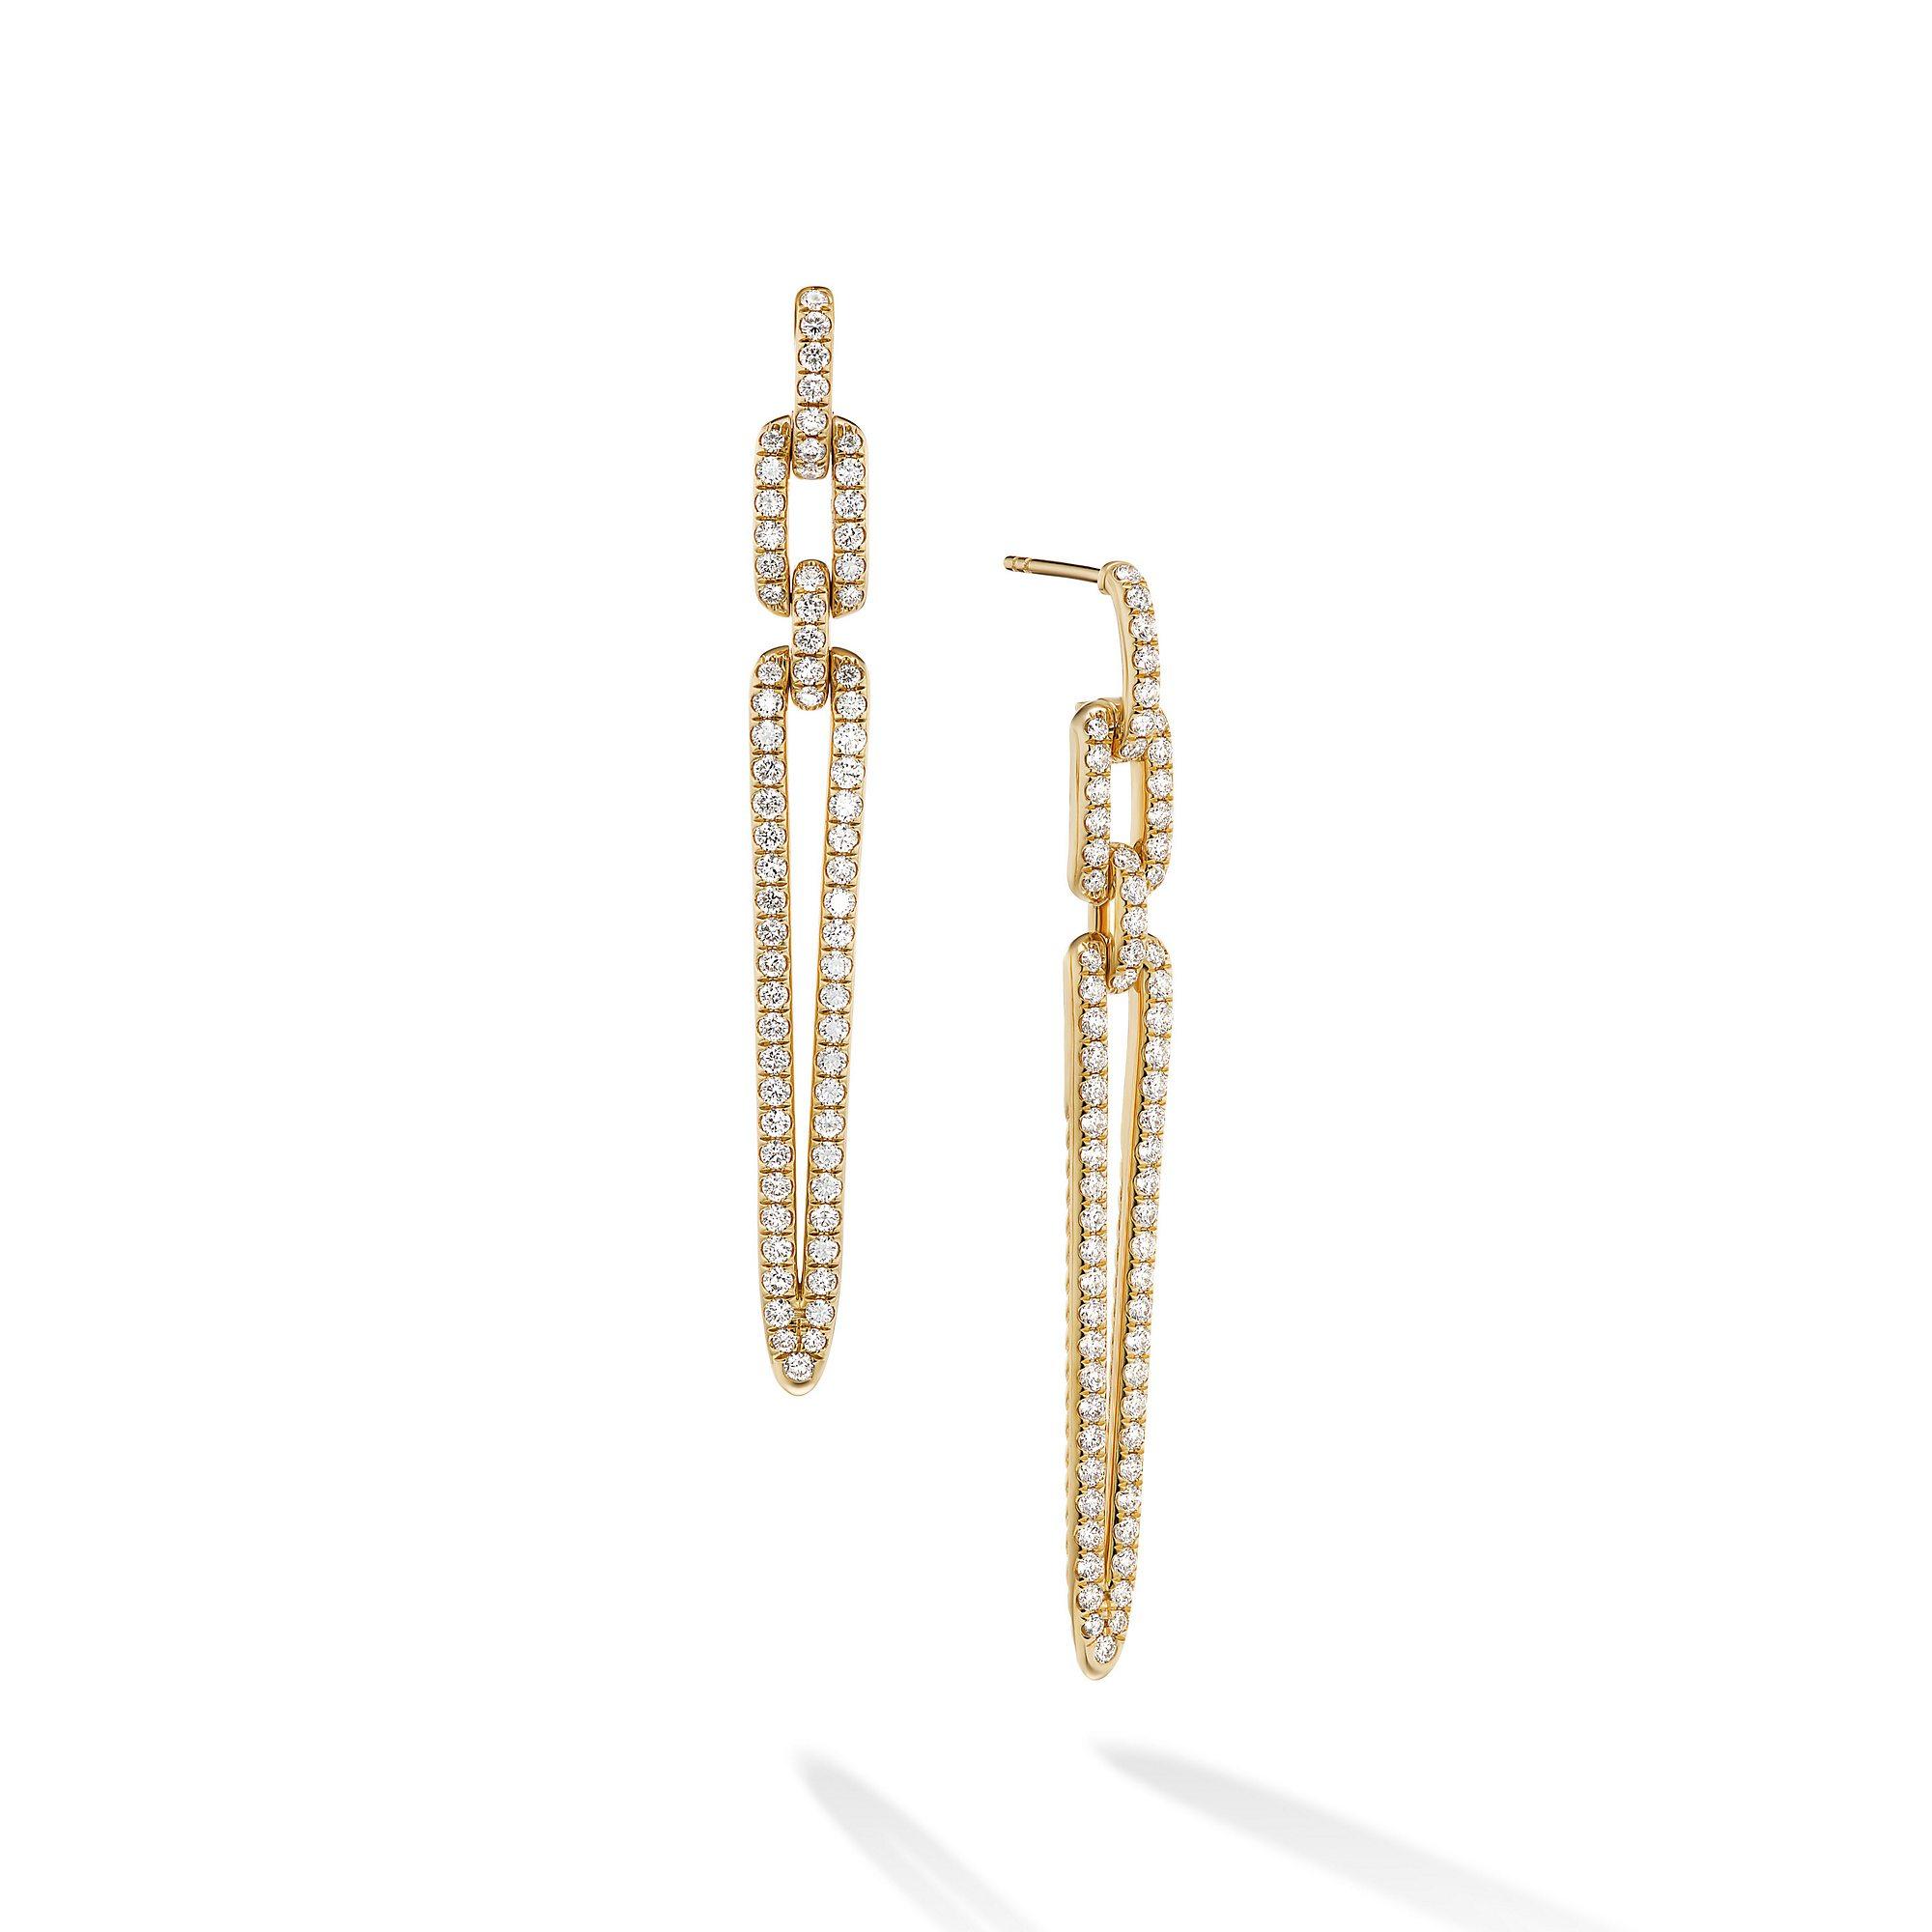 David Yurman Stax Elongated Drop Earrings in 18K Yellow Gold with Pave Diamonds | Front View
